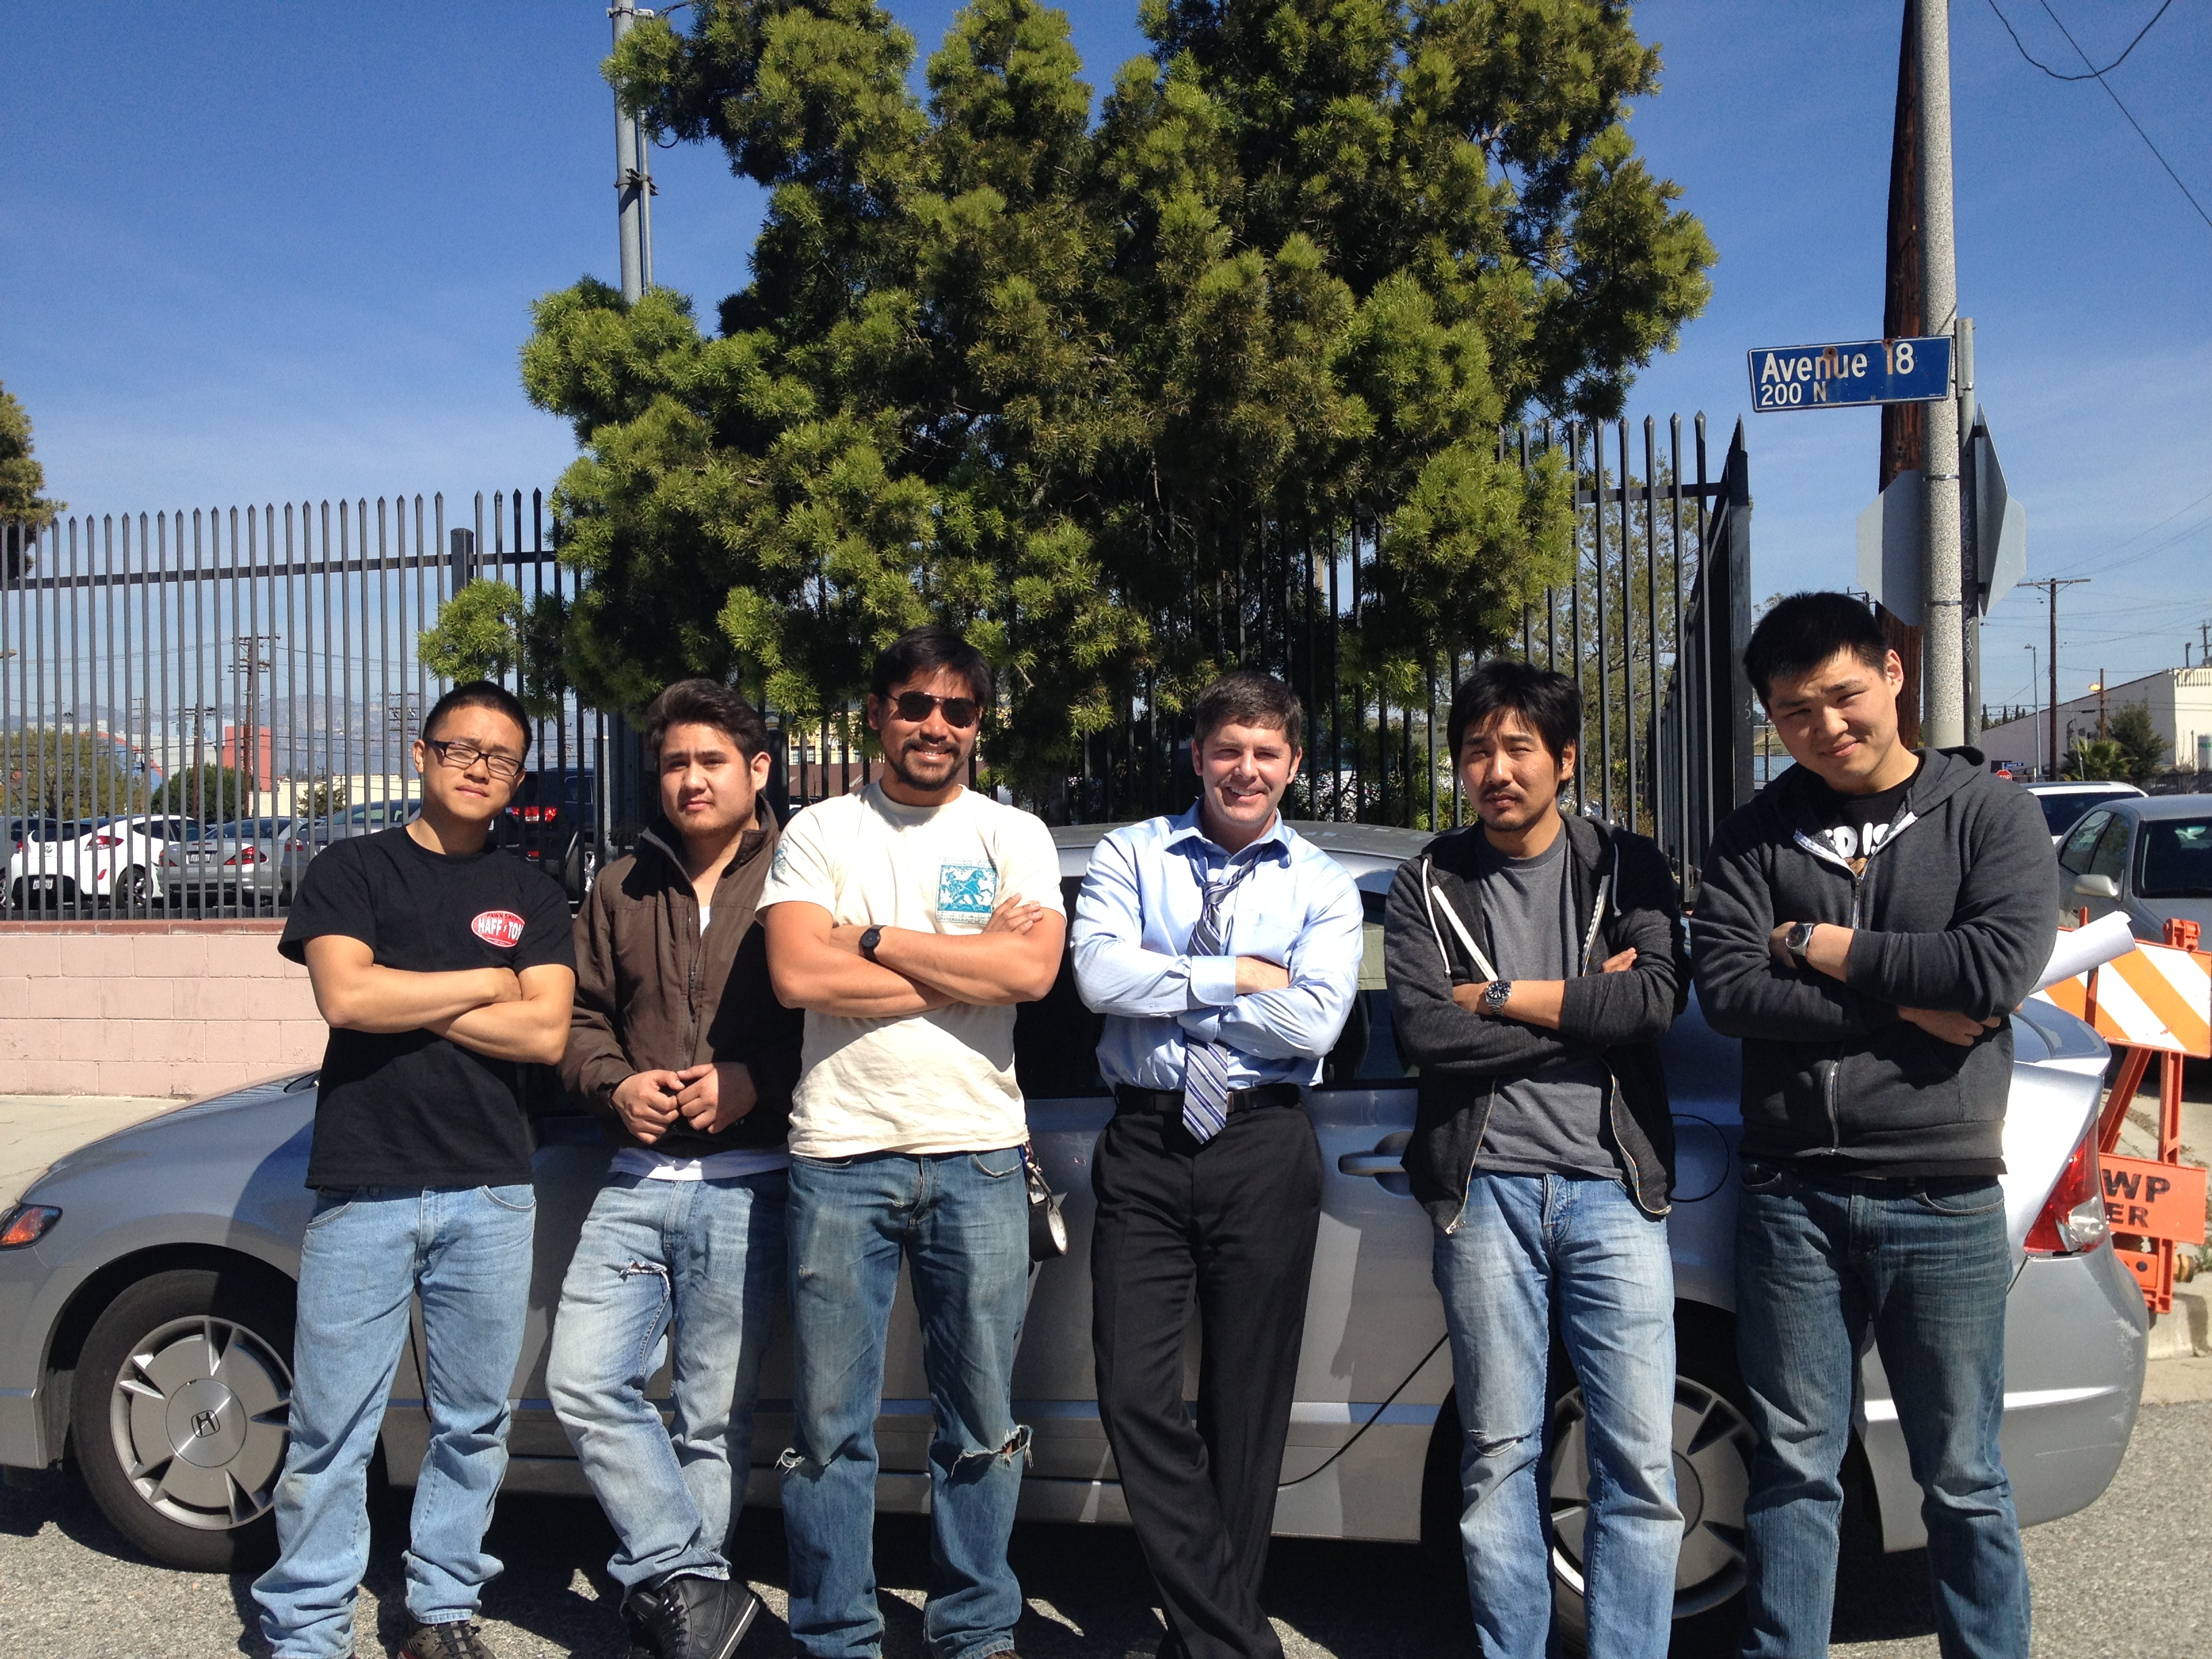 Actor Rich Handley with film crew on the set of Navigation (2013 Official Selection for the International Smart Phone Film Festival), DP Chung-hoon Chung second to right, Director Dan Park on far right Director, Danny Park on far right.